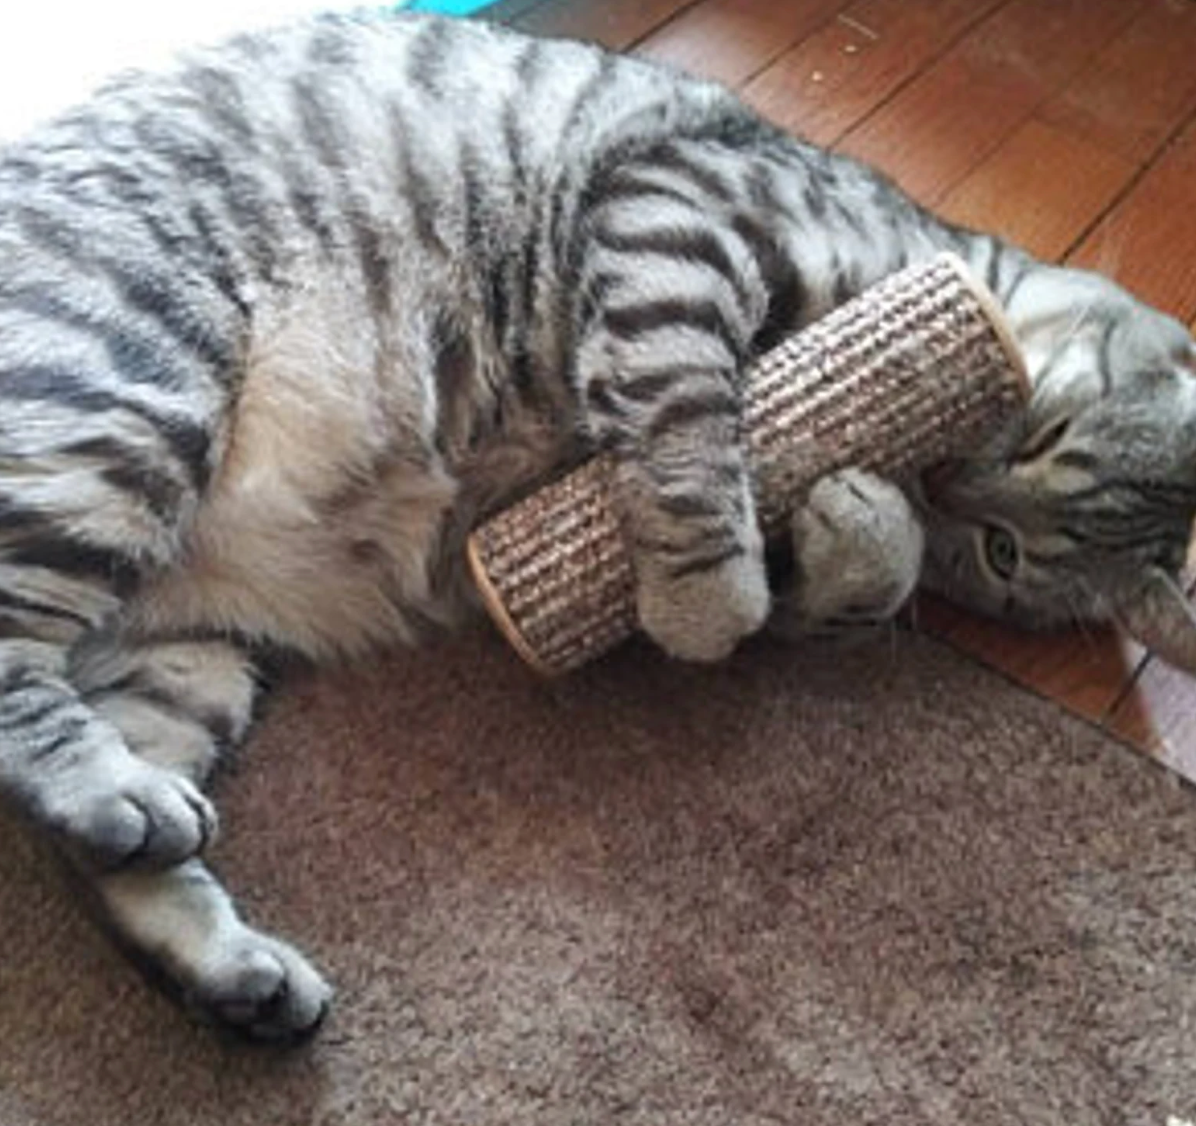 A cat holding the toy 